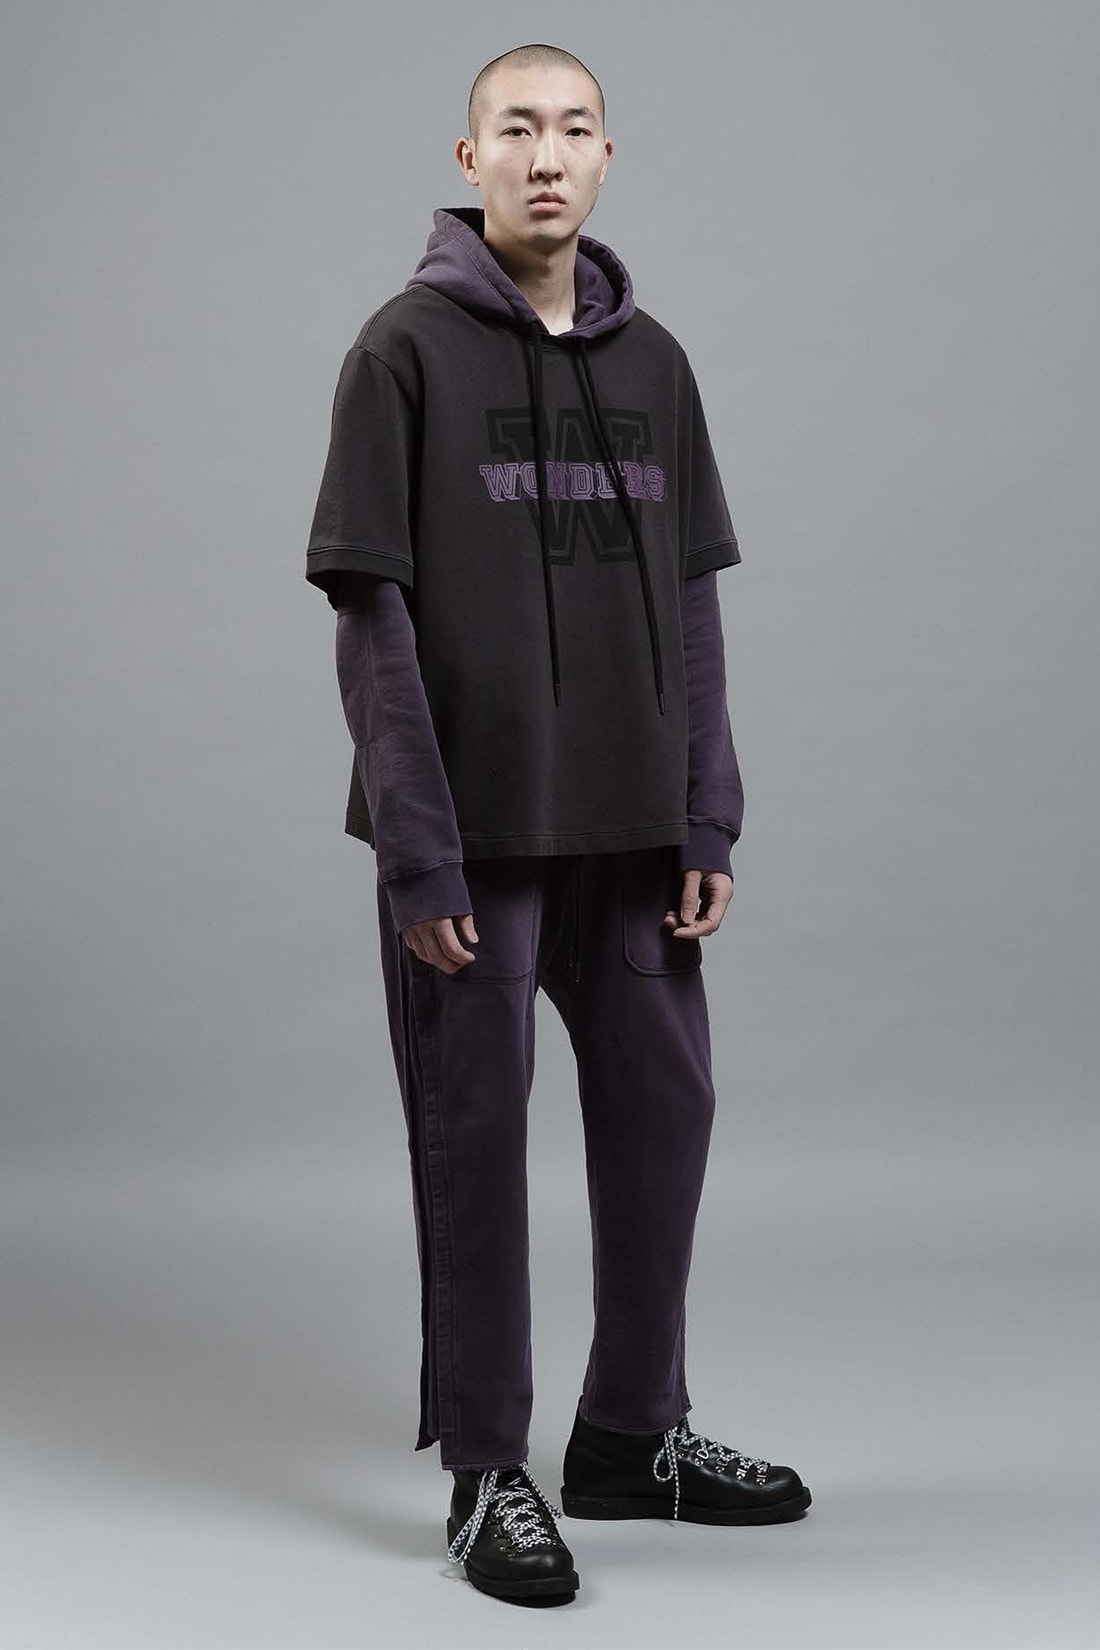 Wonders Fall Winter 2018 Don't Give up Collection Lookbook Jacket Hoodie T-Shirts Pants